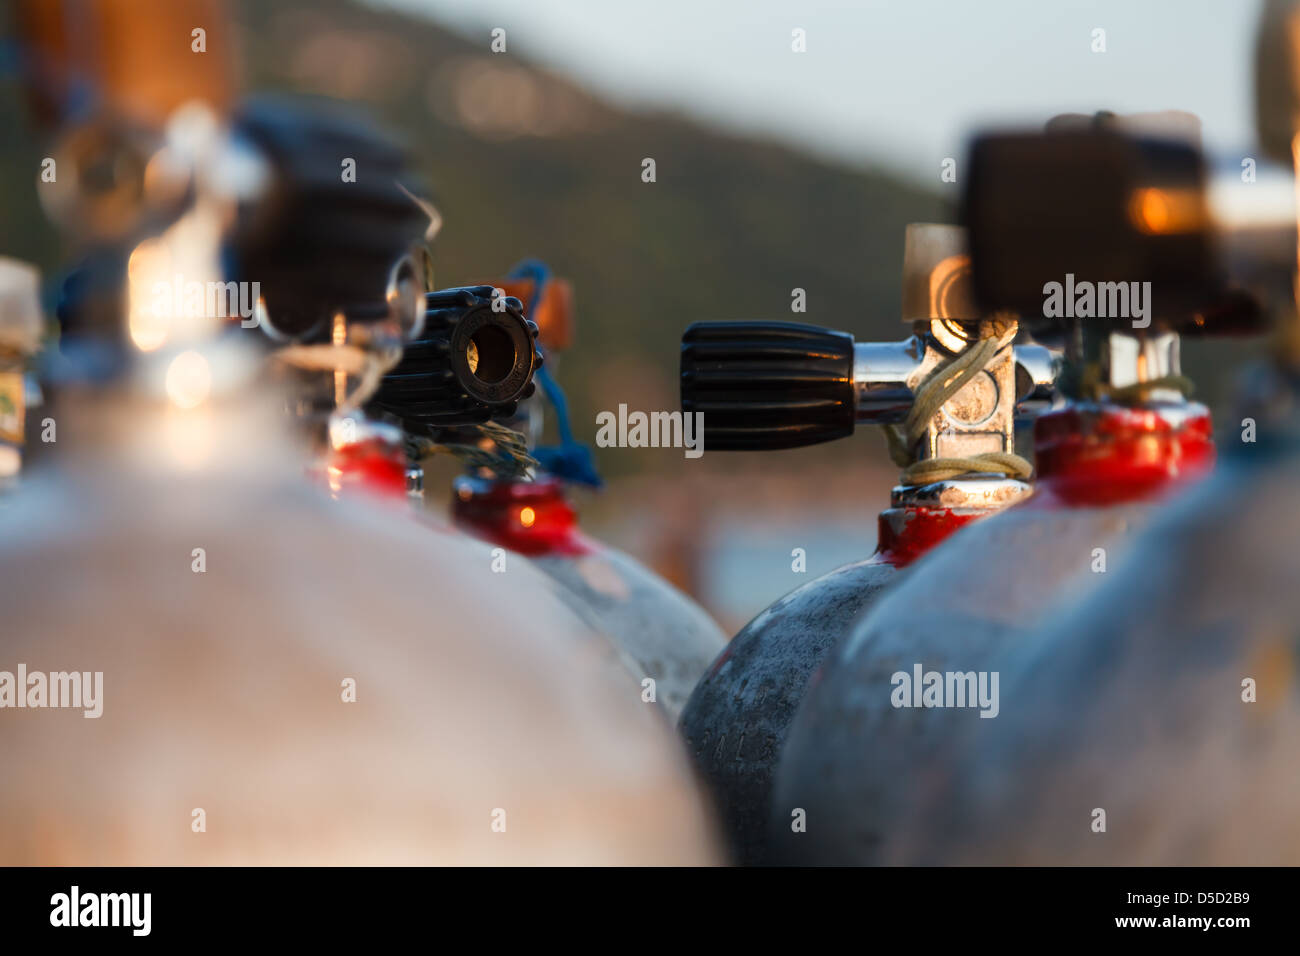 Close up valve of oxygen tank for scuba diving with shallow depth of field Stock Photo